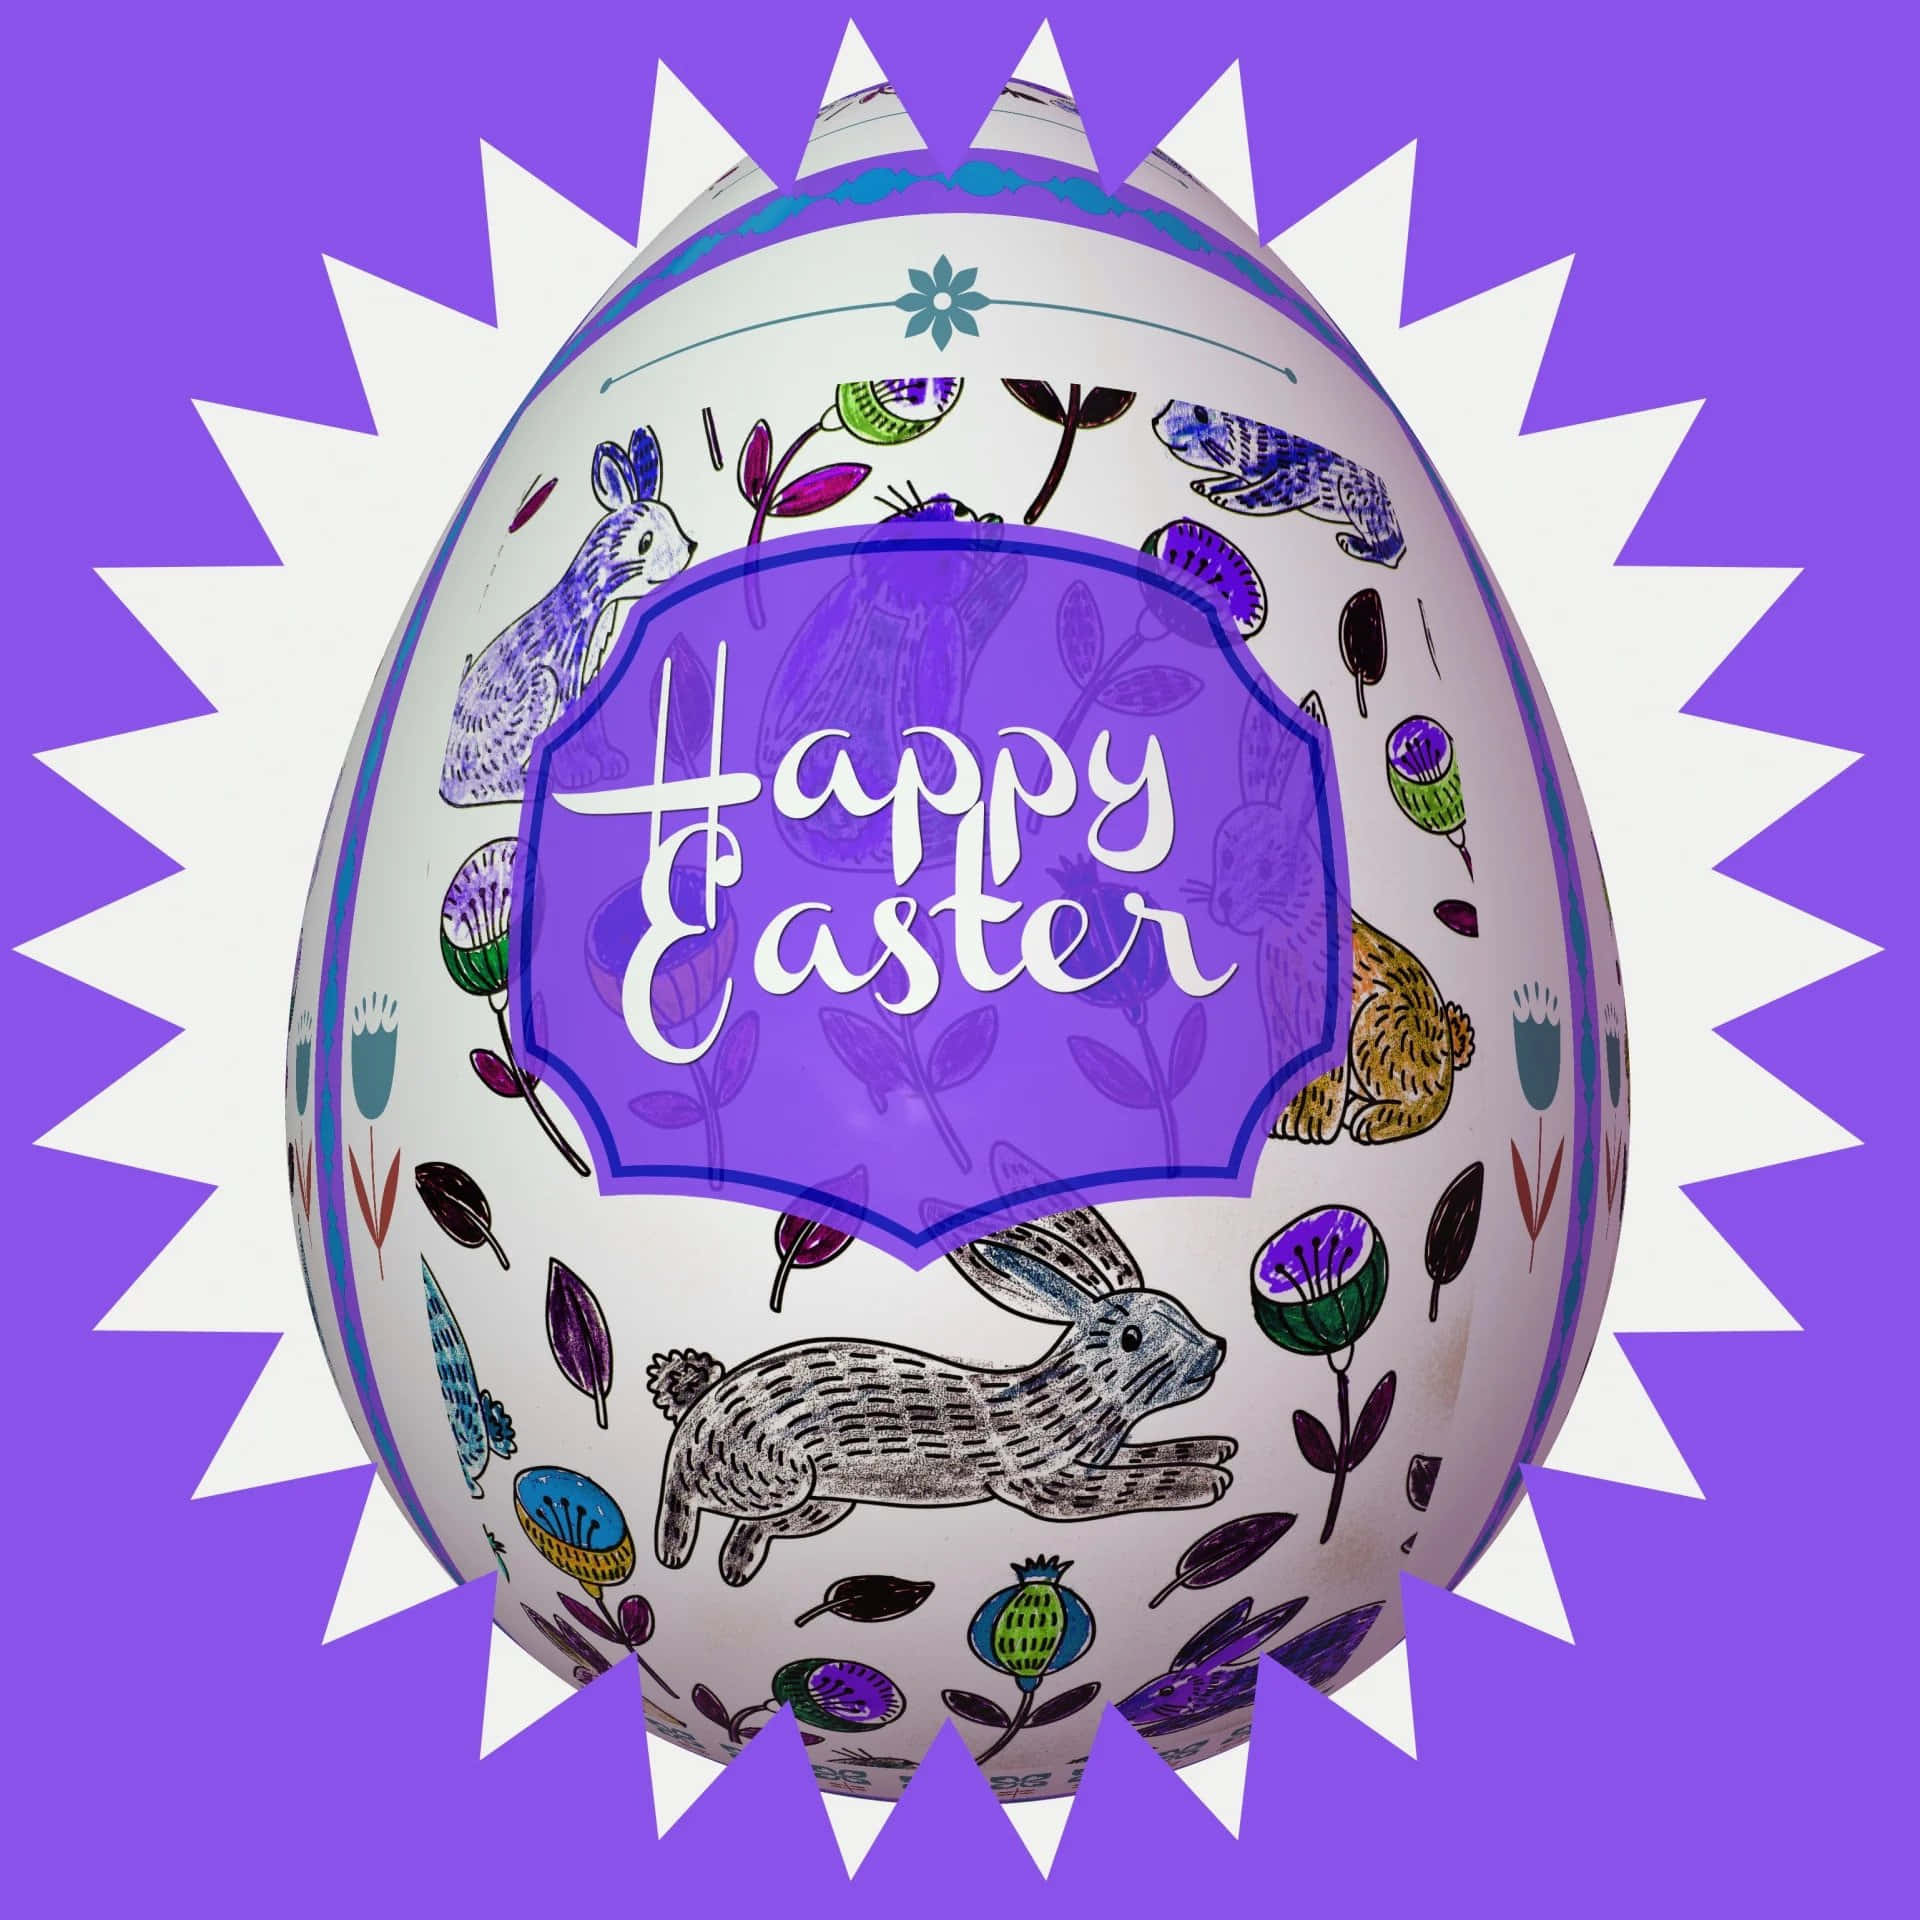 Happy Easter Card With A Purple Background